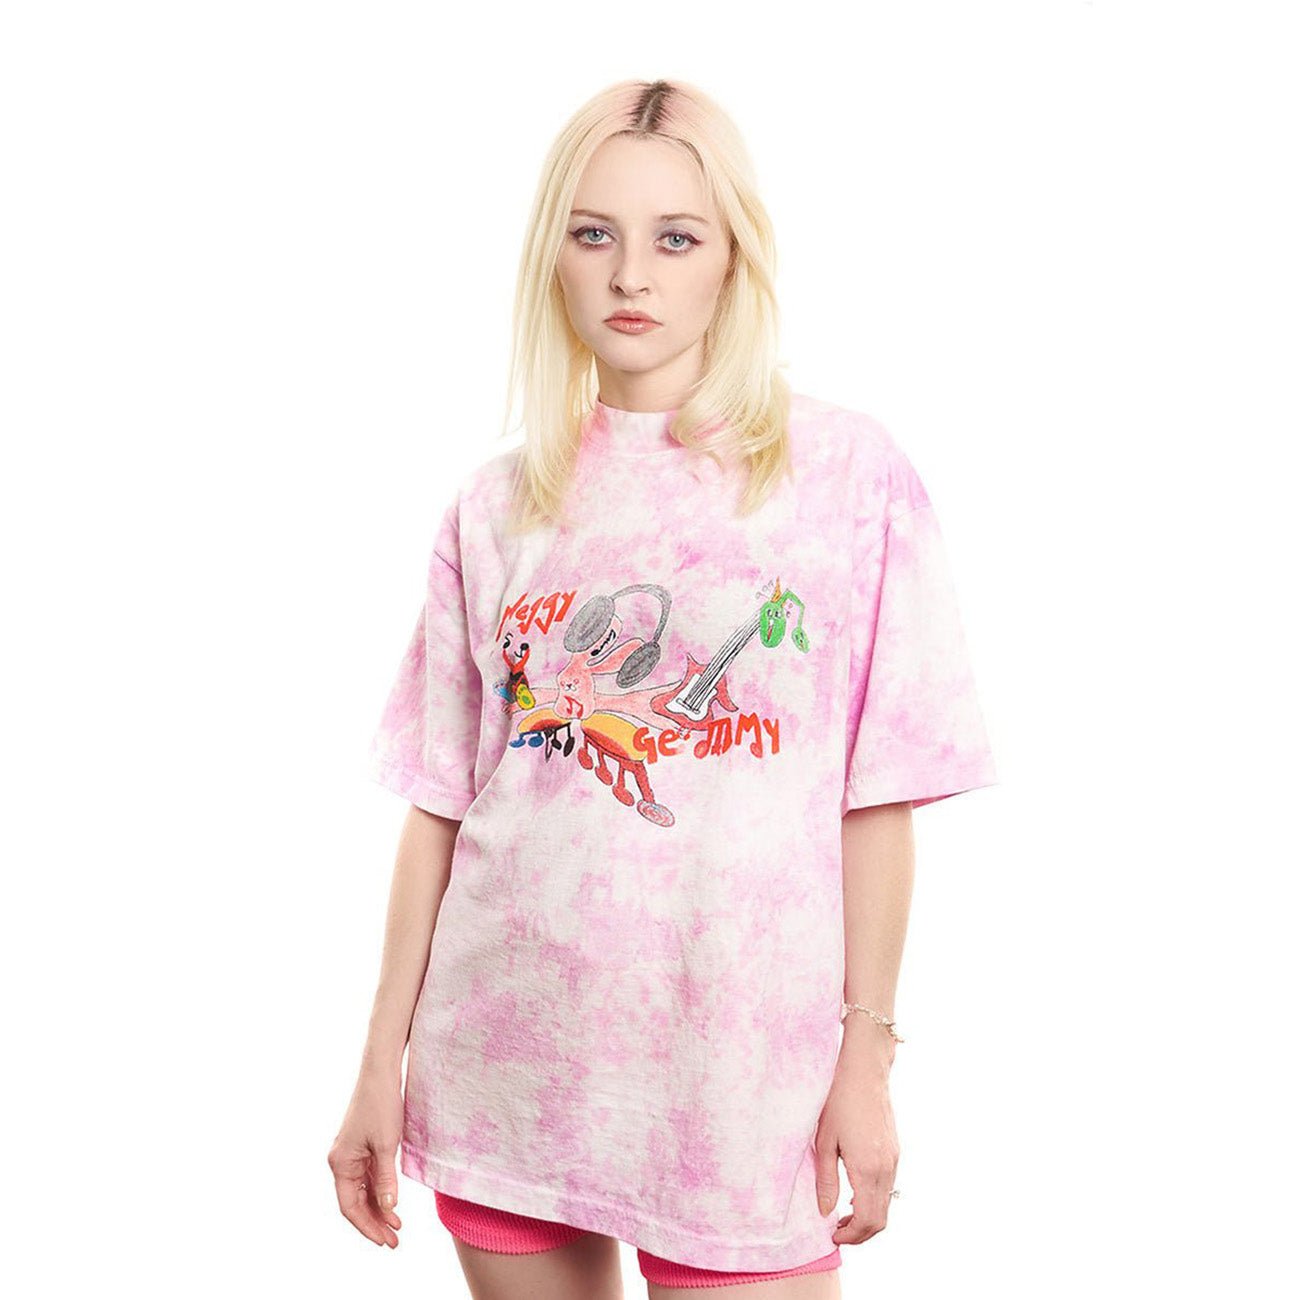 Neggy Gemmy - Pink Tie Dye T-Shirt - 100% Electronica Official Store (Photo 3)